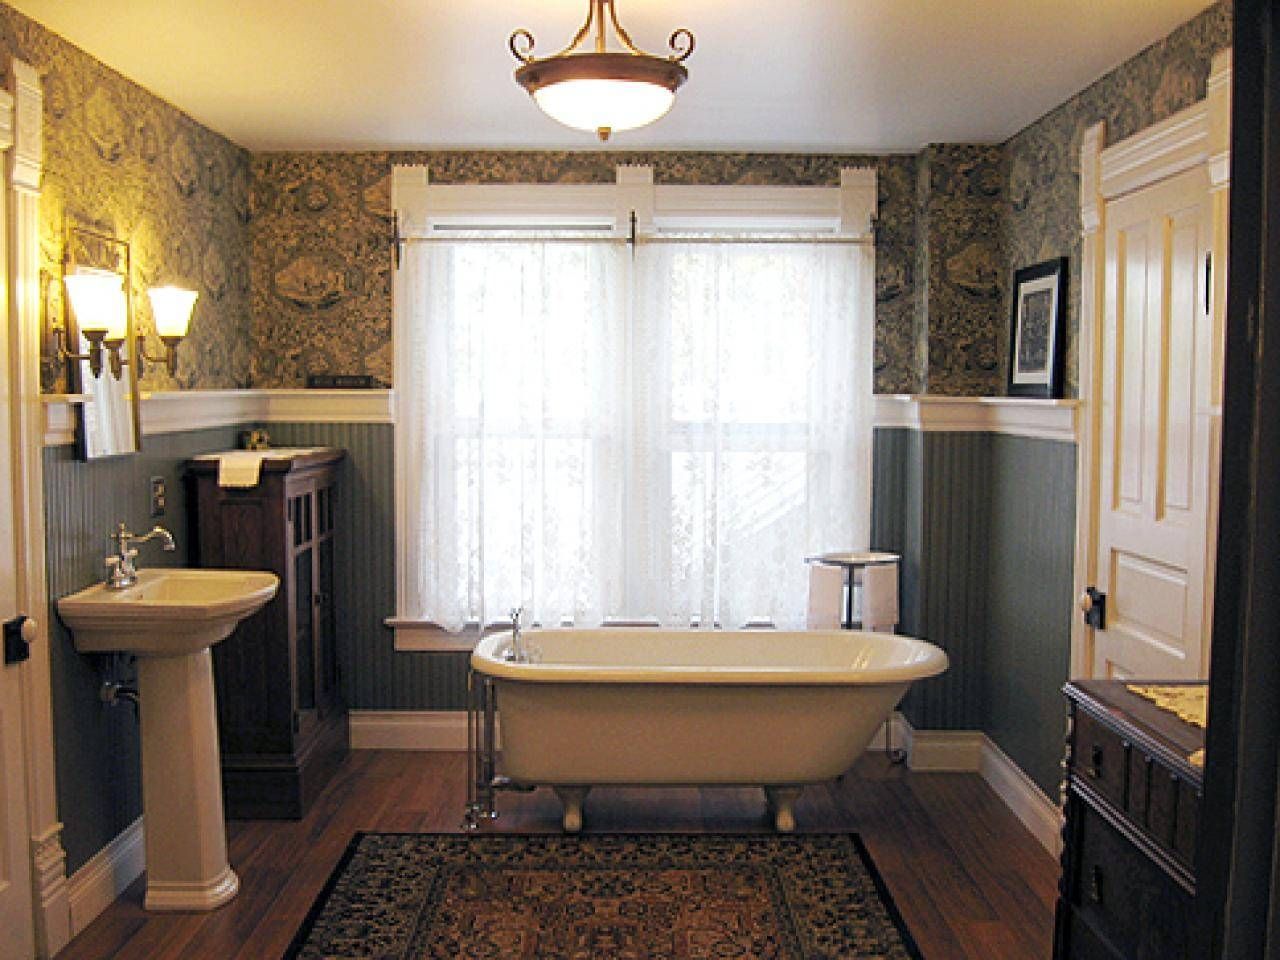 Victorian Bathroom Design Ideas: Pictures & Tips From Hgtv | Hgtv Within Victorian Style Mirrors For Bathrooms (View 24 of 25)